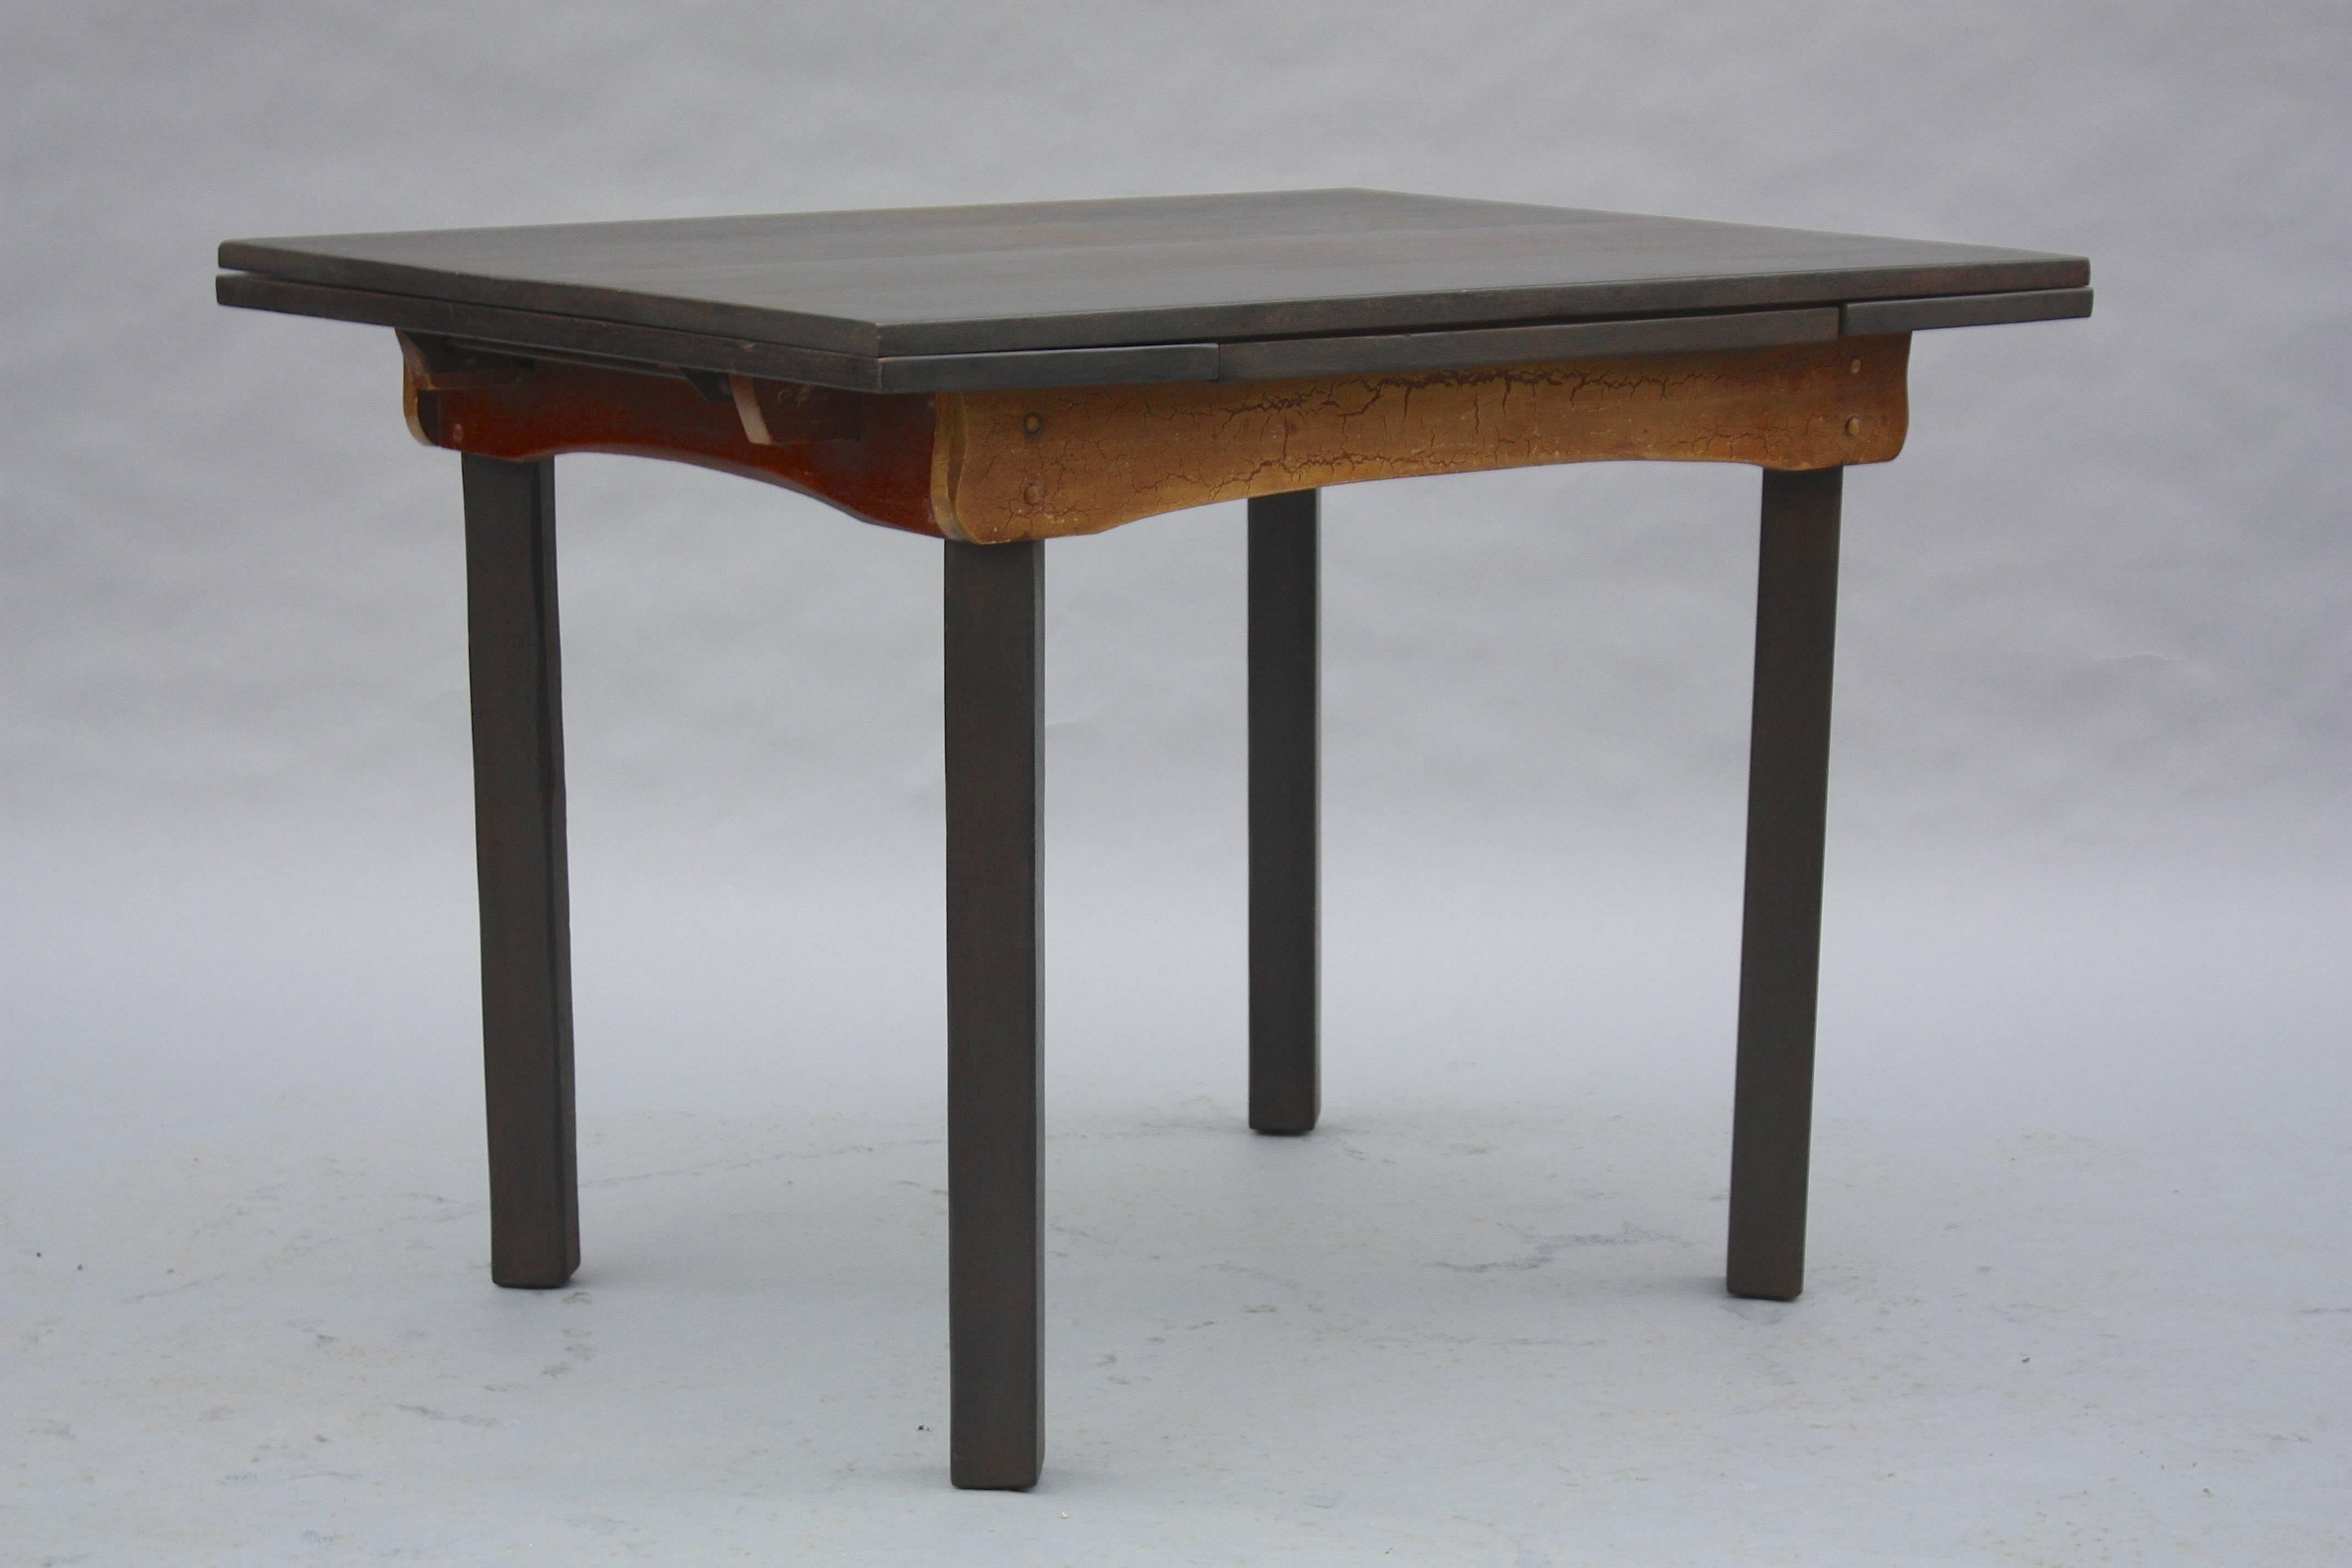 Mid-20th Century Monterey Period Dining Room Table with Expandable Leaves